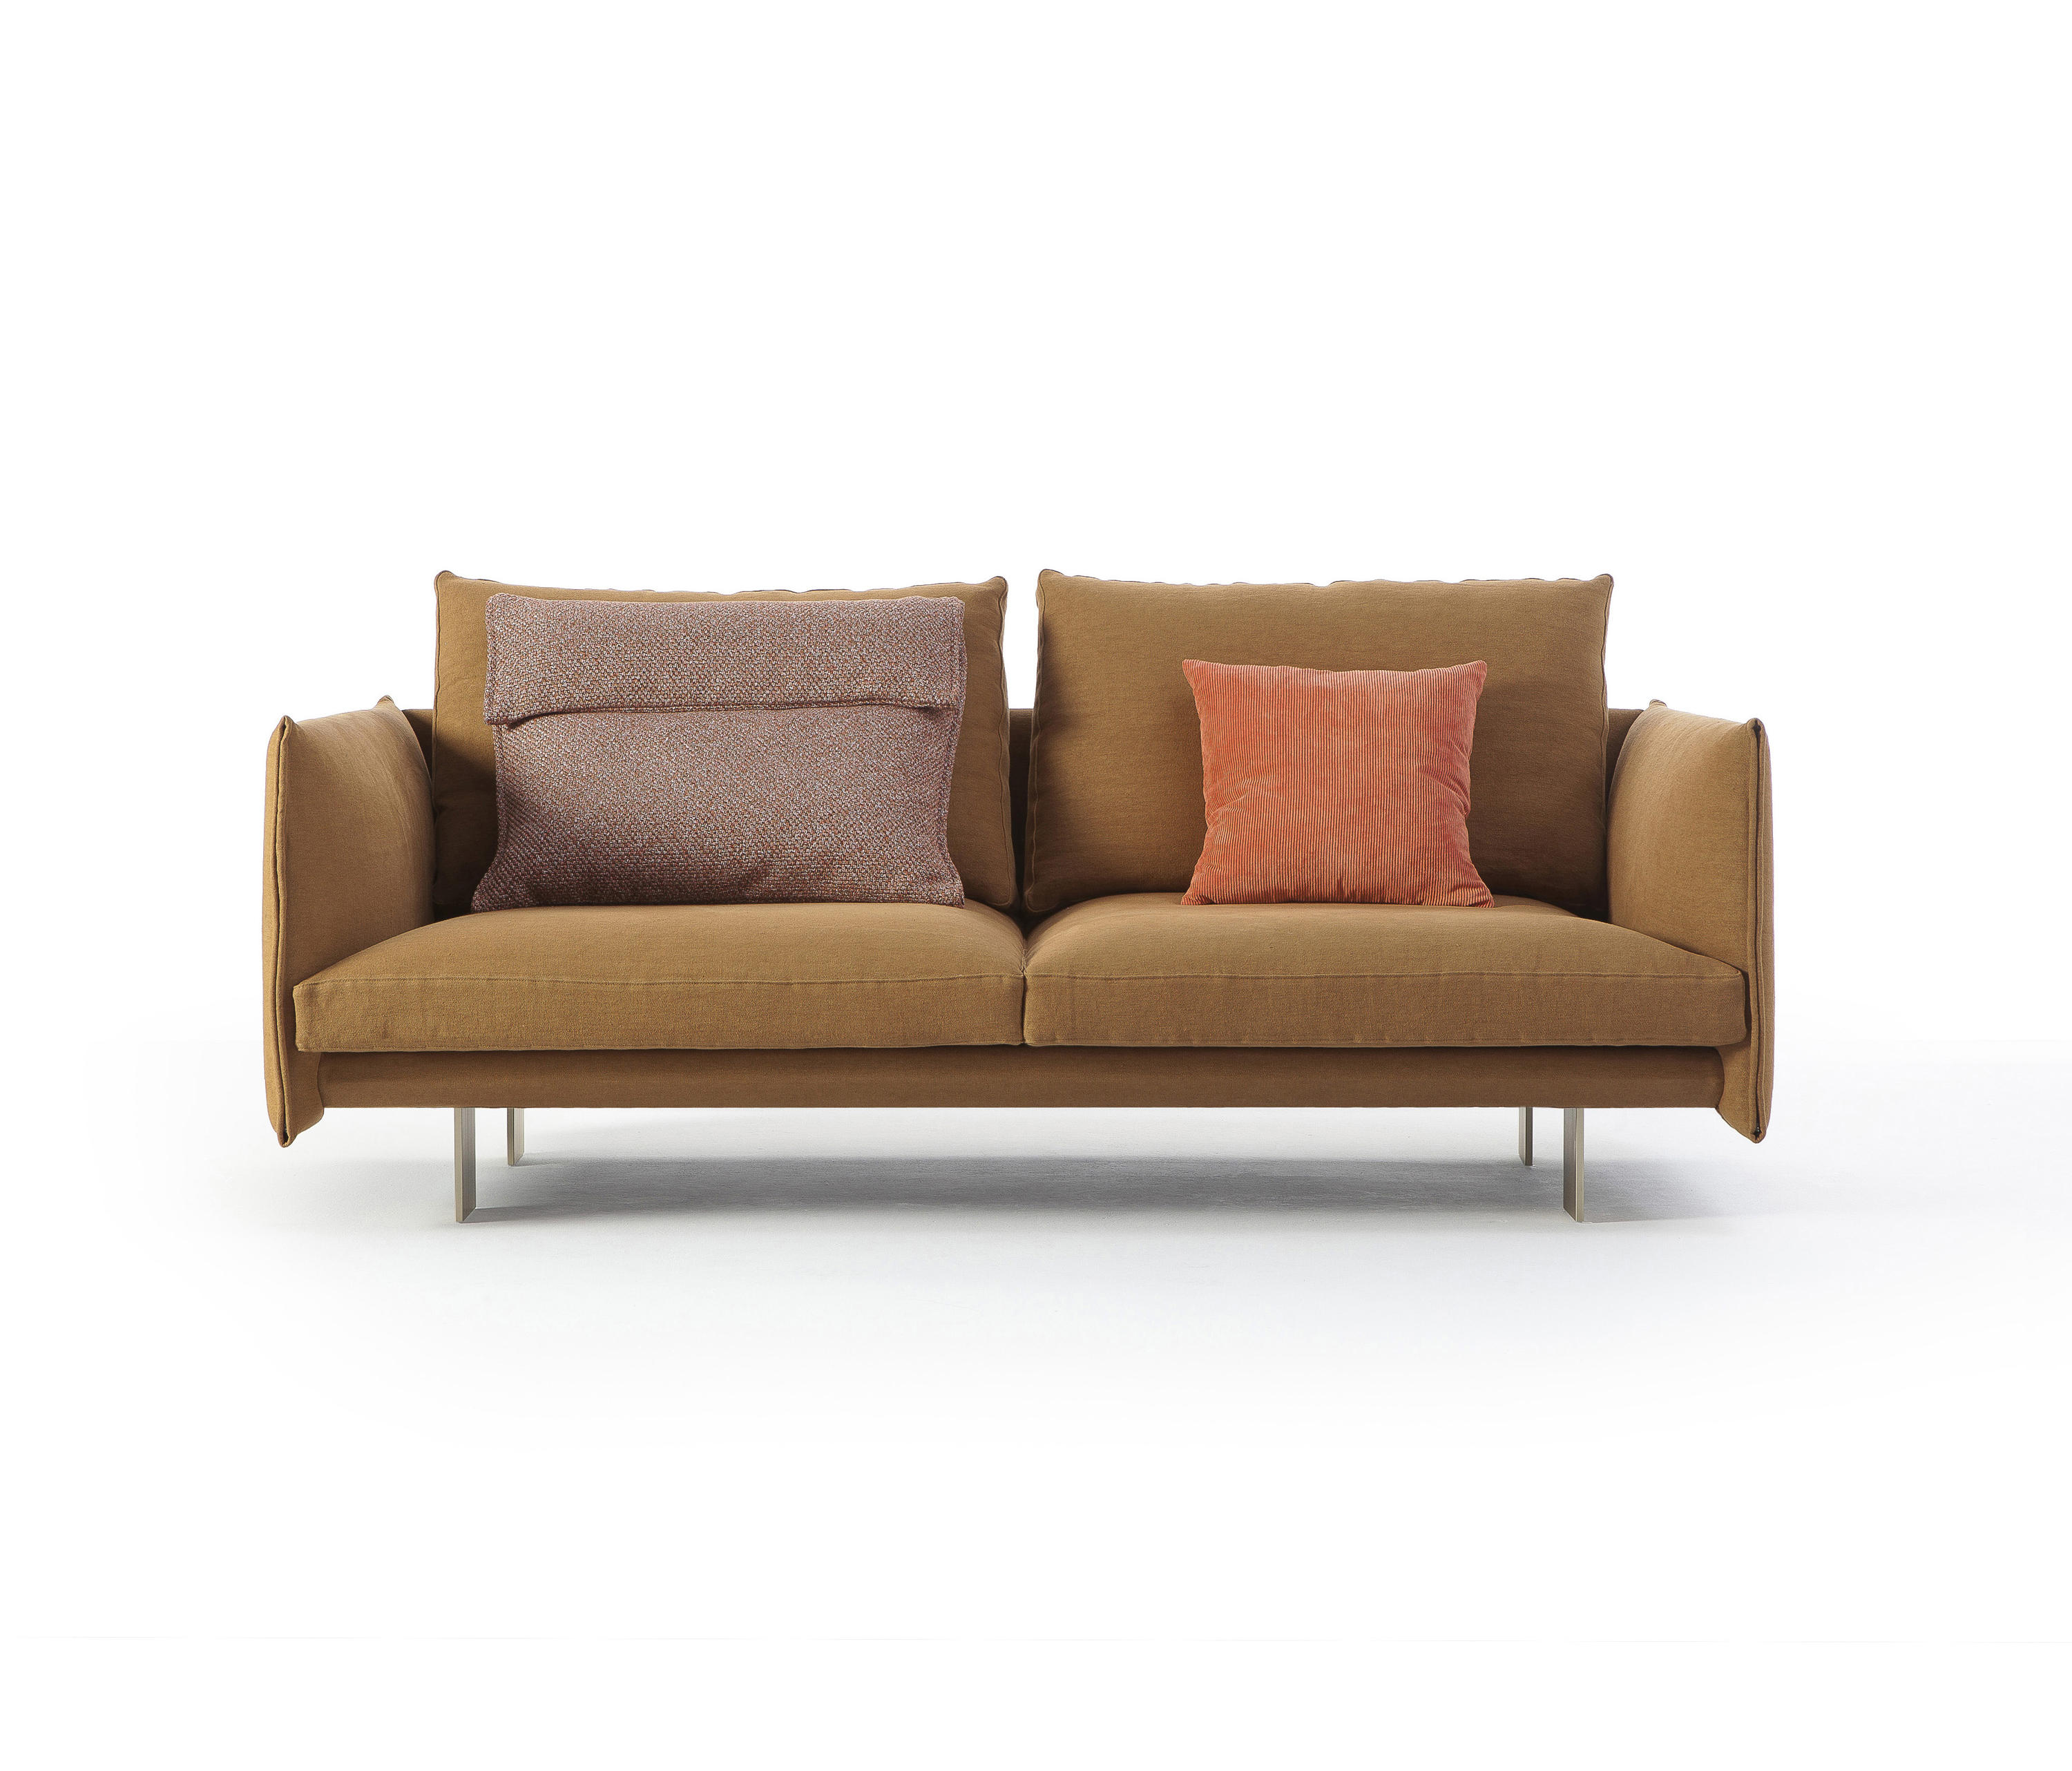 DEEP - Sofas from Sancal | Architonic